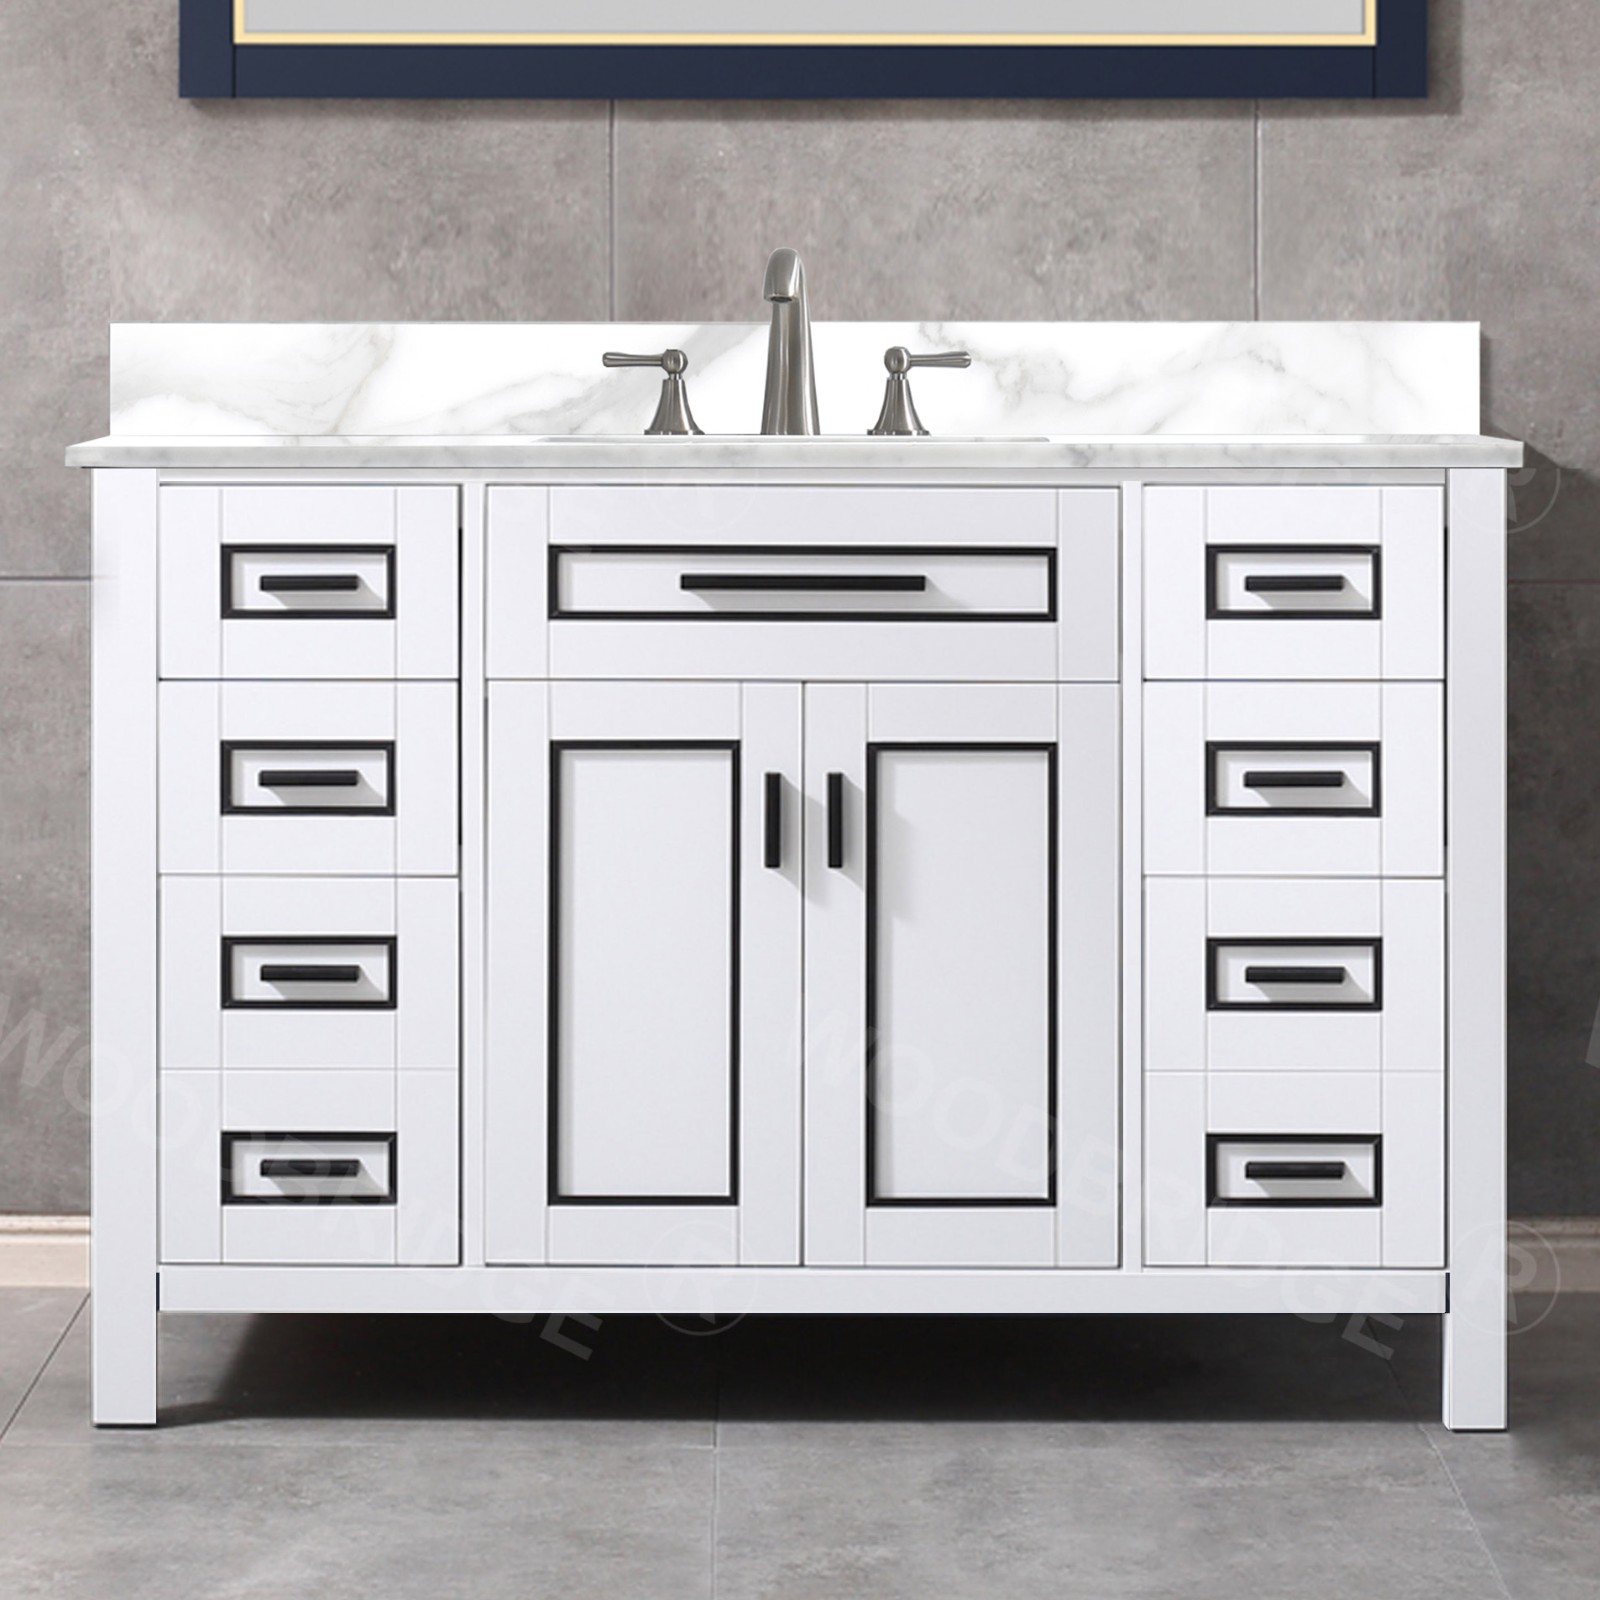  WOODBRIDGE Milan  49” Floor Mounted Single Basin Vanity Set with Solid Wood Cabinet in White and Engineered stone composite Vanity Top in Fish Belly White with Pre-installed Undermount Rectangle Bathroom Sink and Pre-Drilled 3-Hole for 8-inch Widespread F_4674